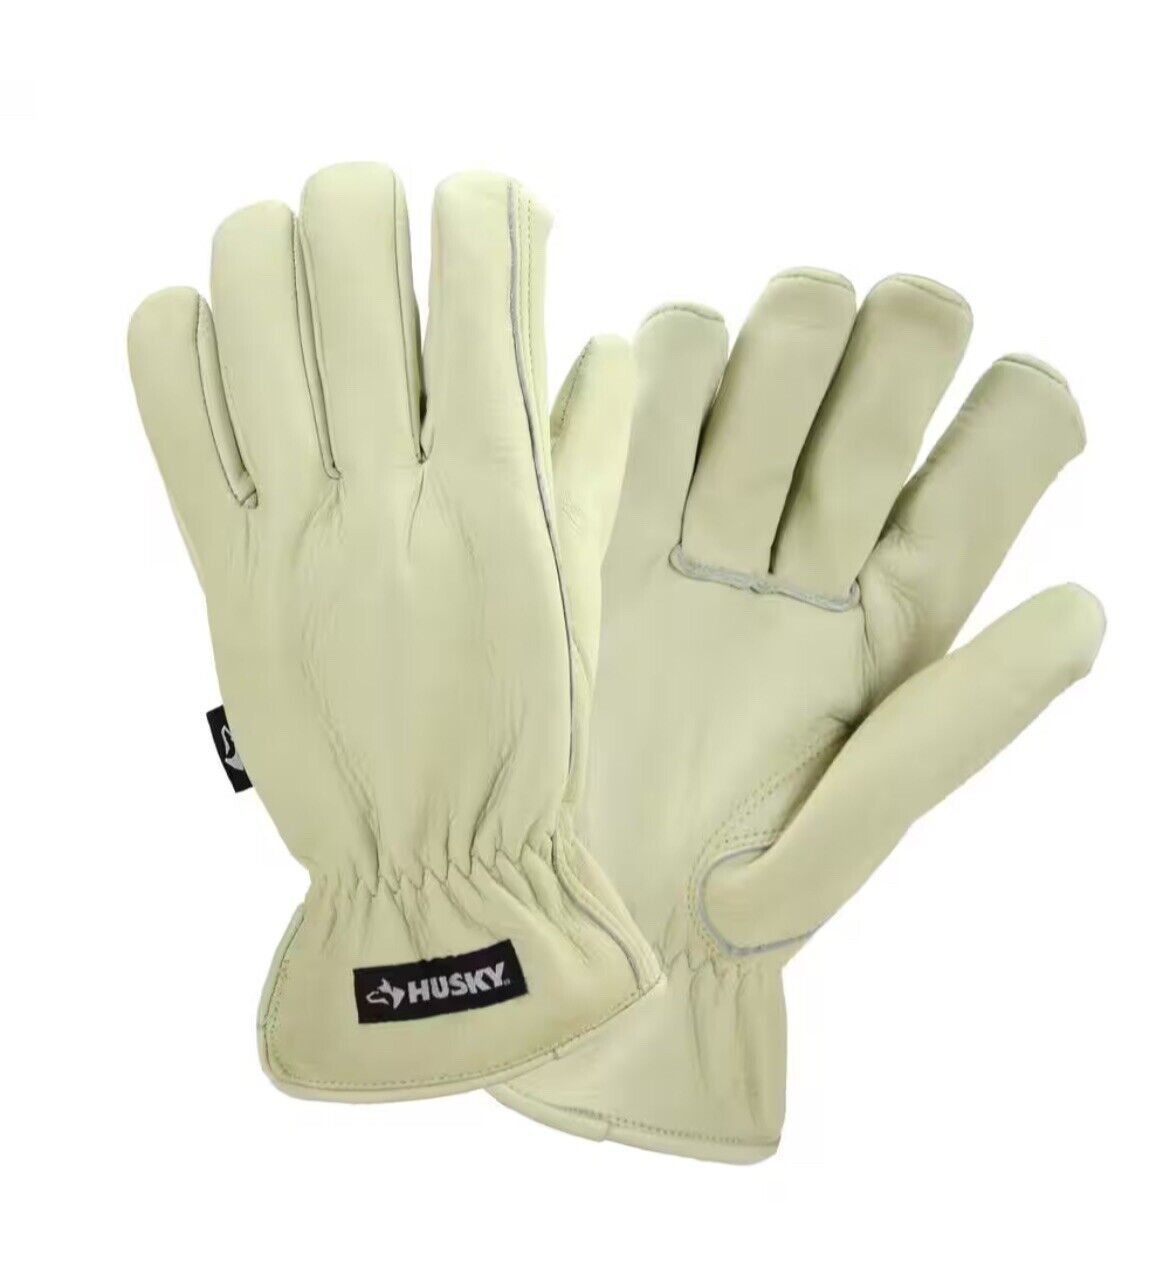 Husky X-Large Premium Grain Cowhide Water-Resistant Leather Work Gloves XL size